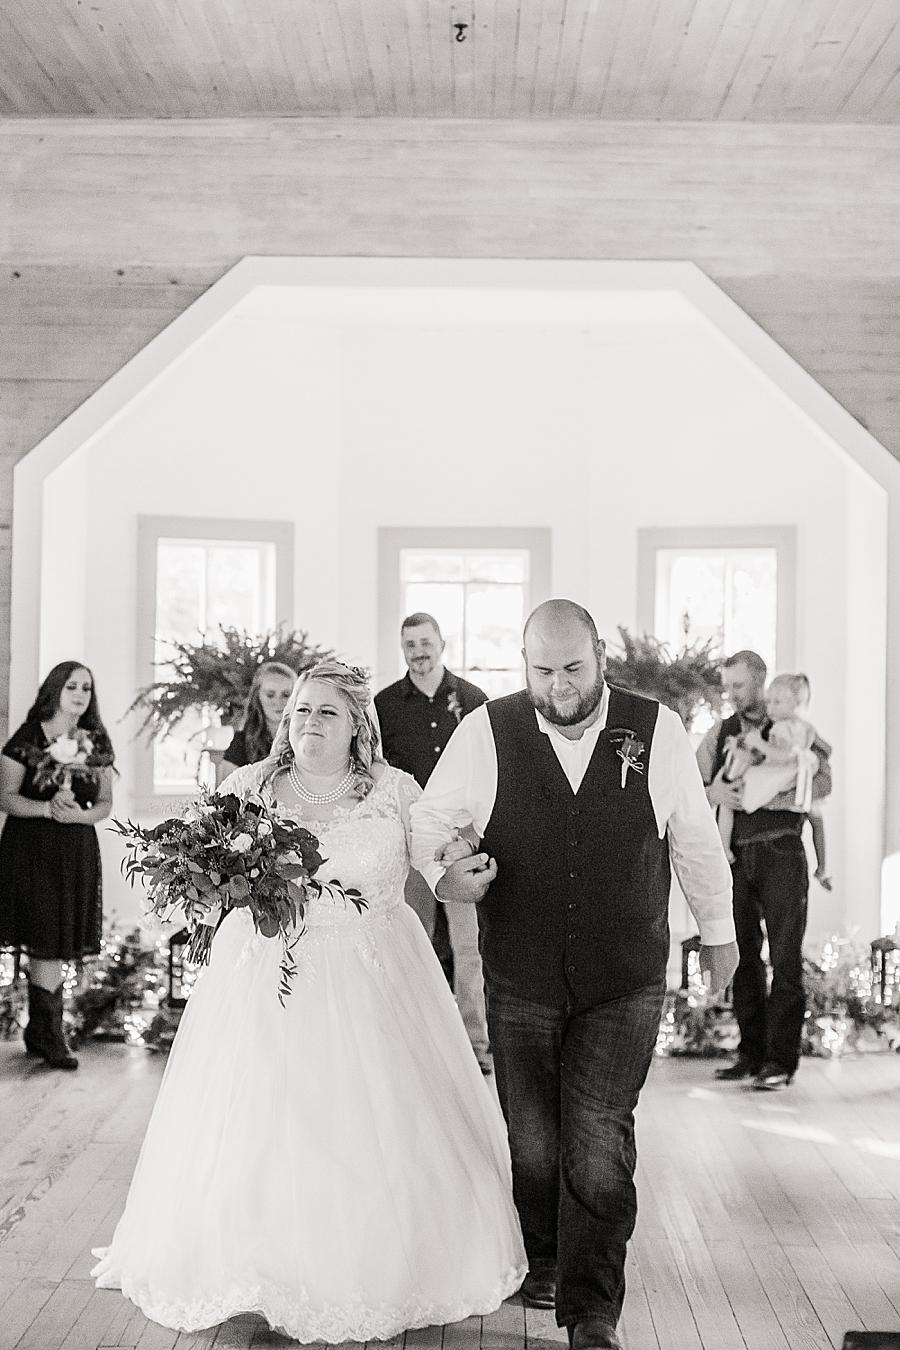 Just married at this Cades Cove wedding by Knoxville Wedding Photographer, Amanda May Photos.